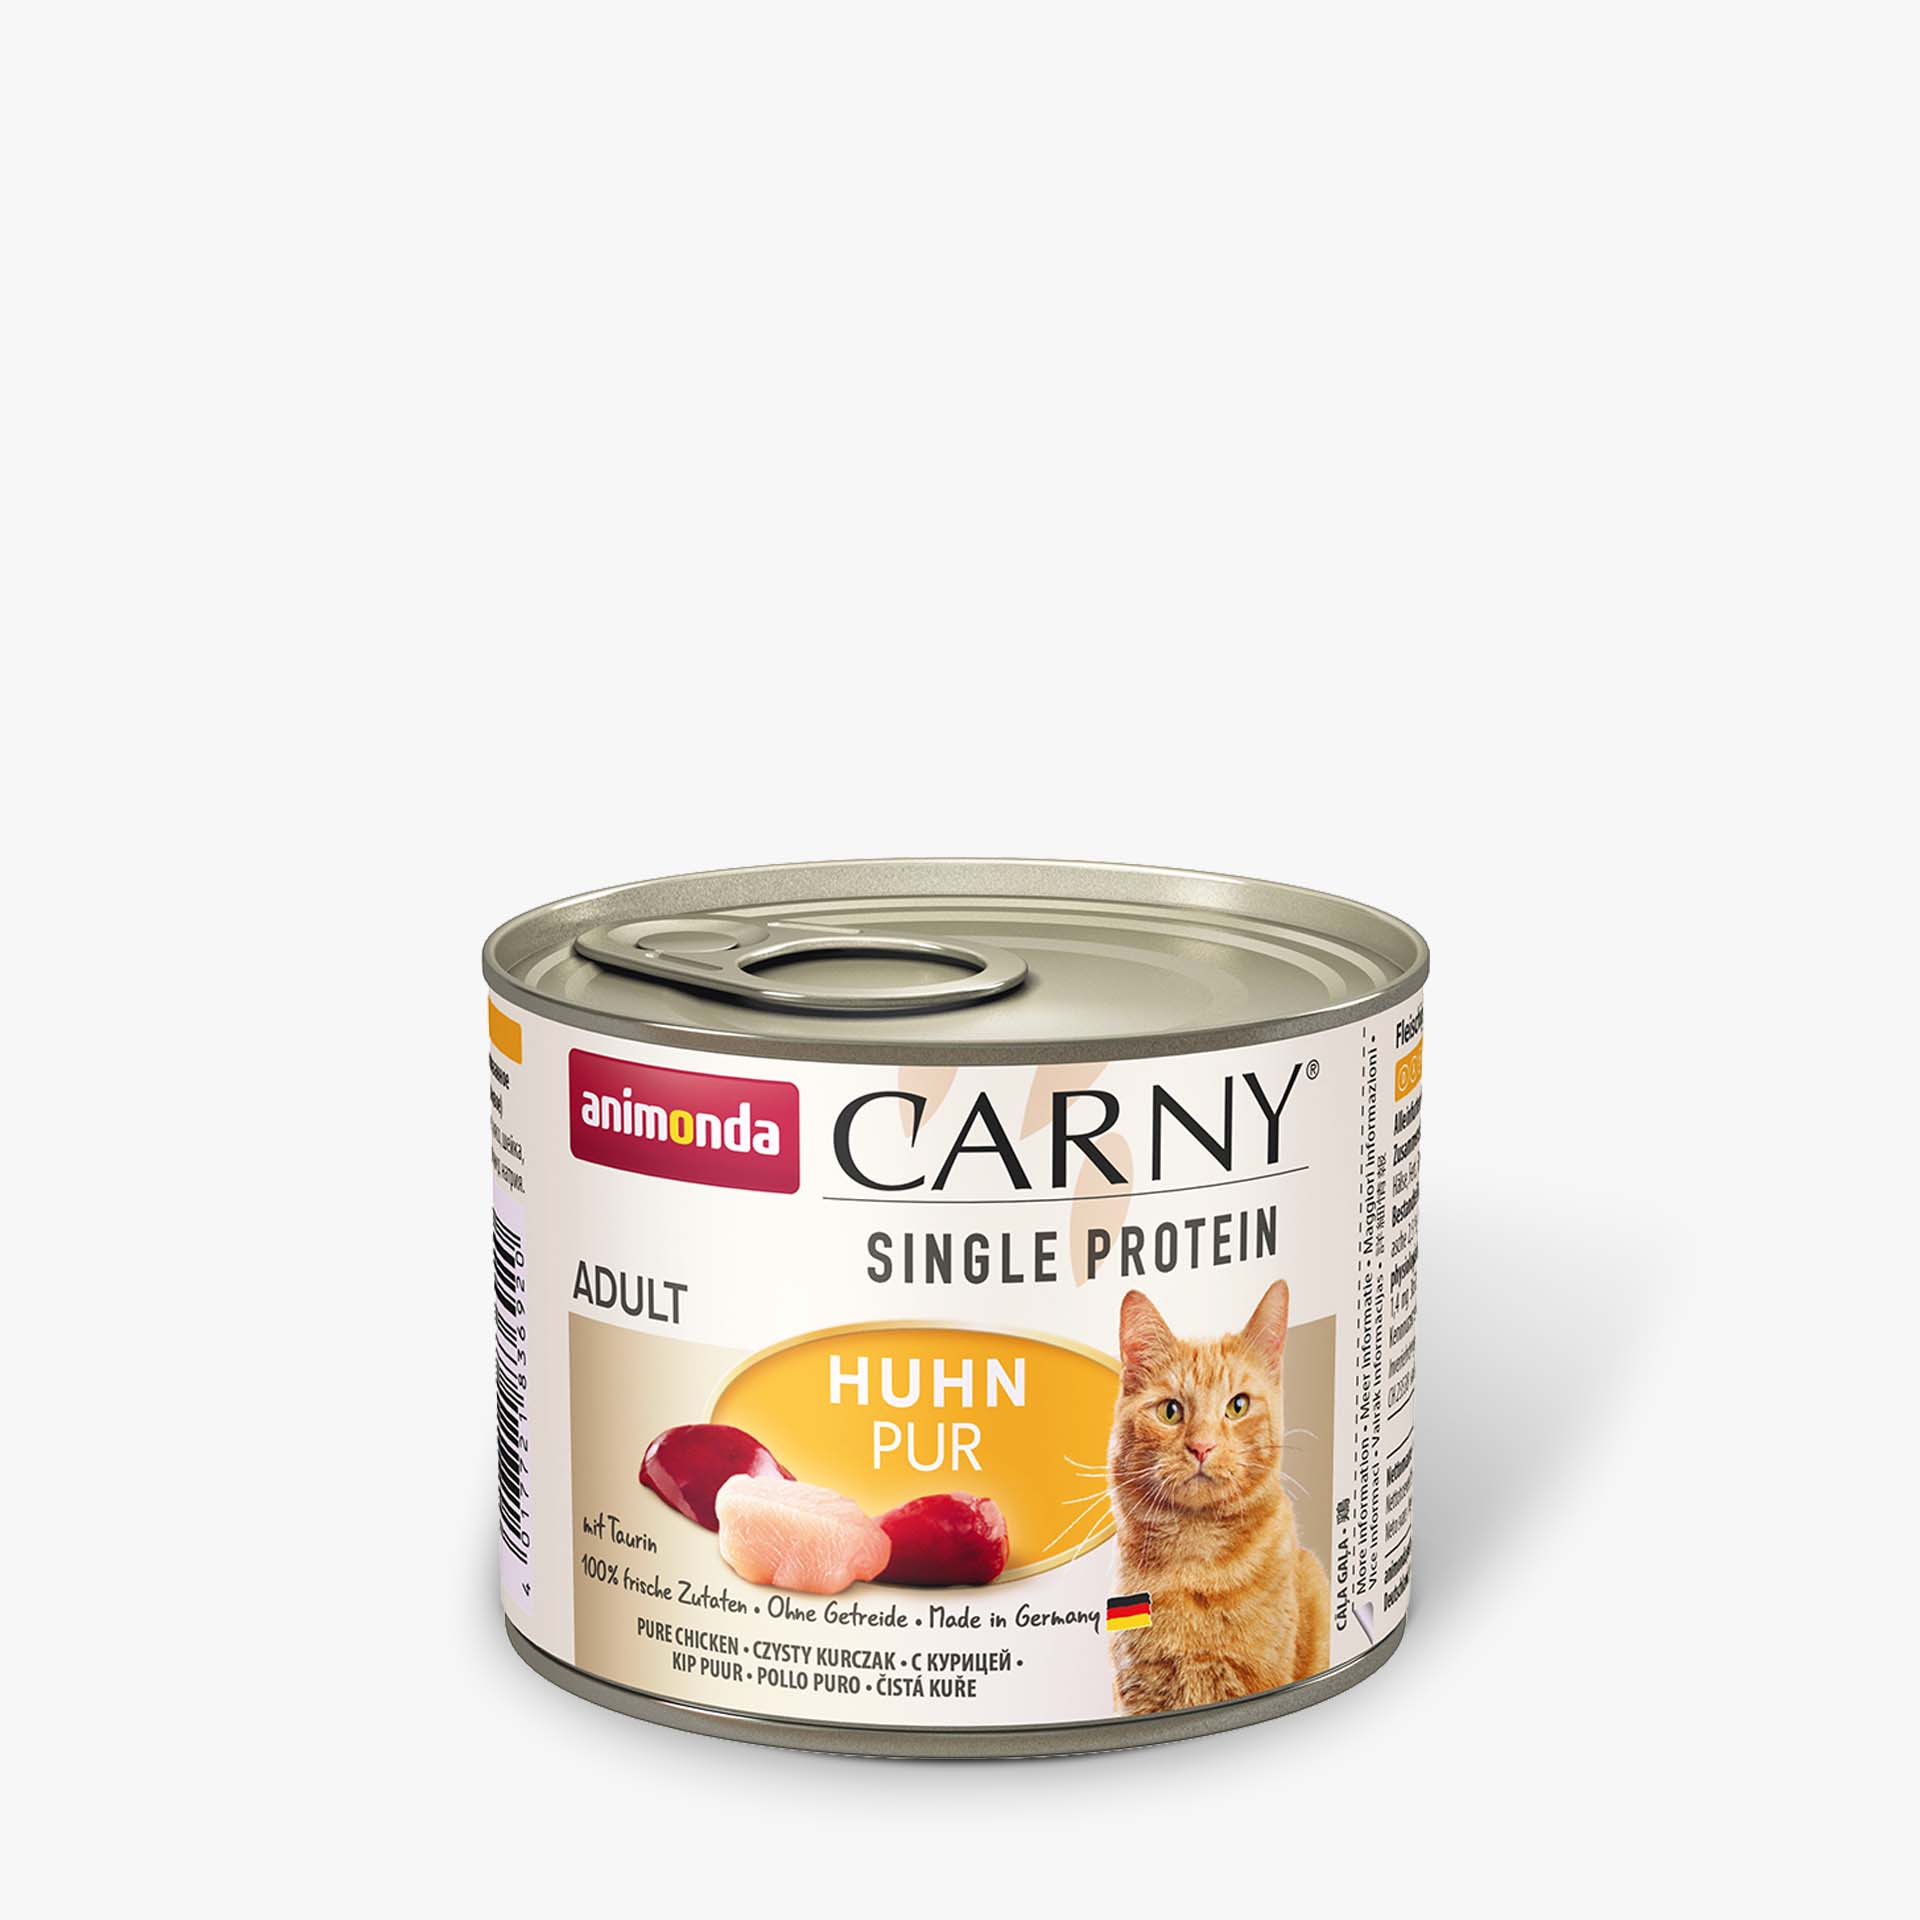 Carny Adult Single Protein Huhn pur